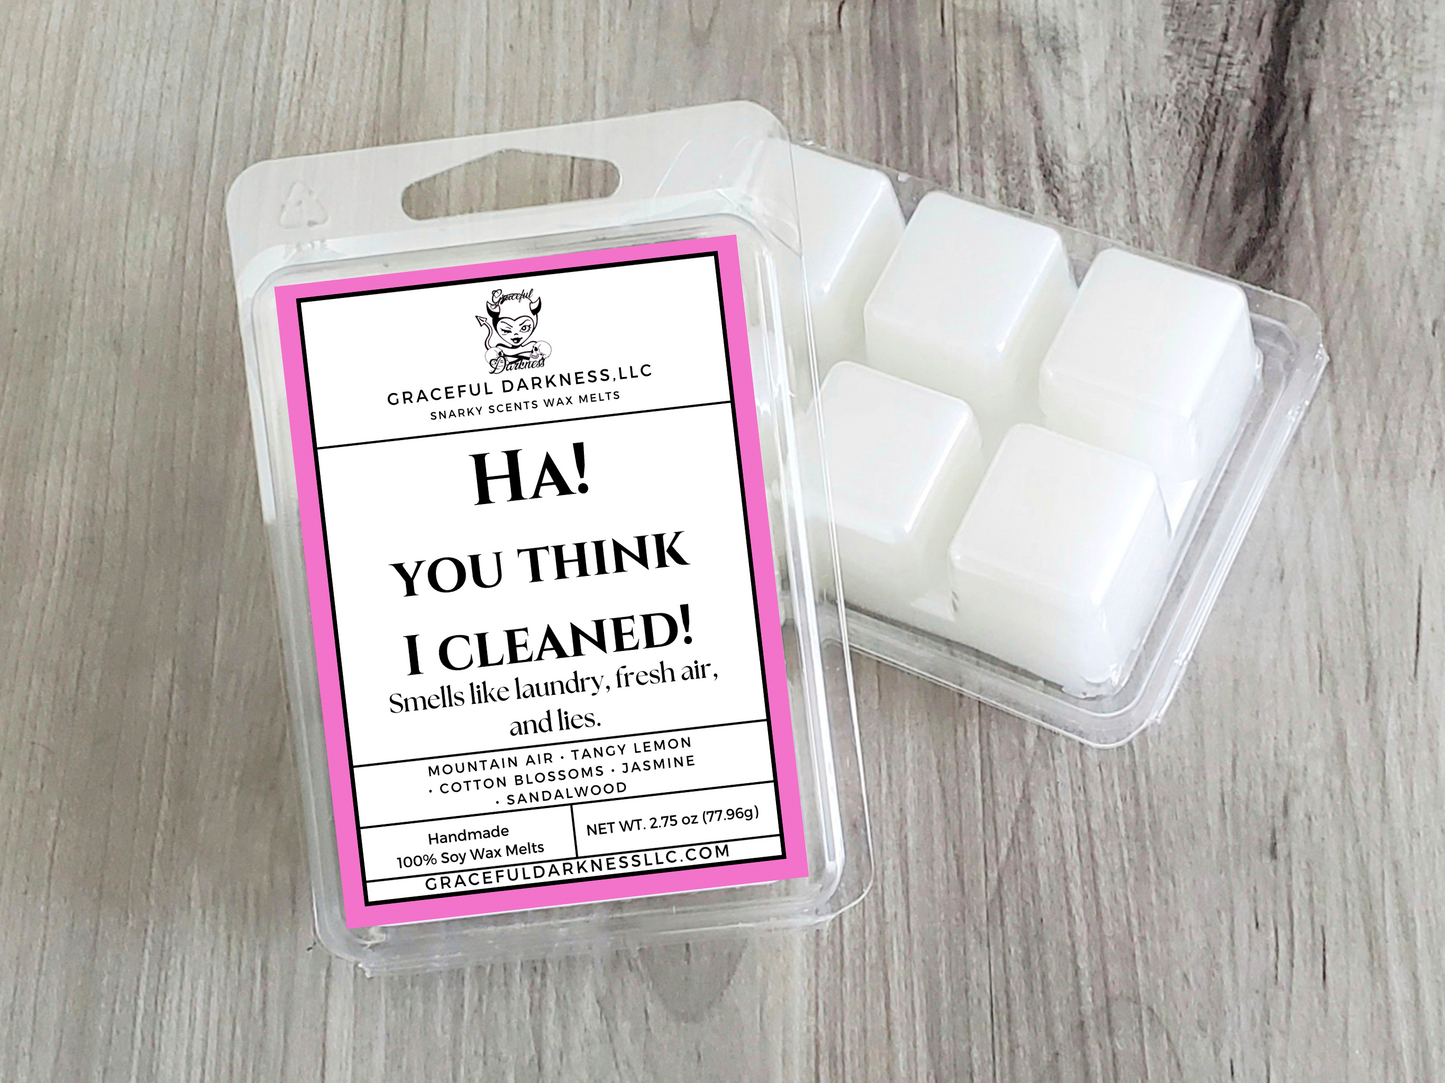 You think I cleaned, Snarky Scents Wax Melts